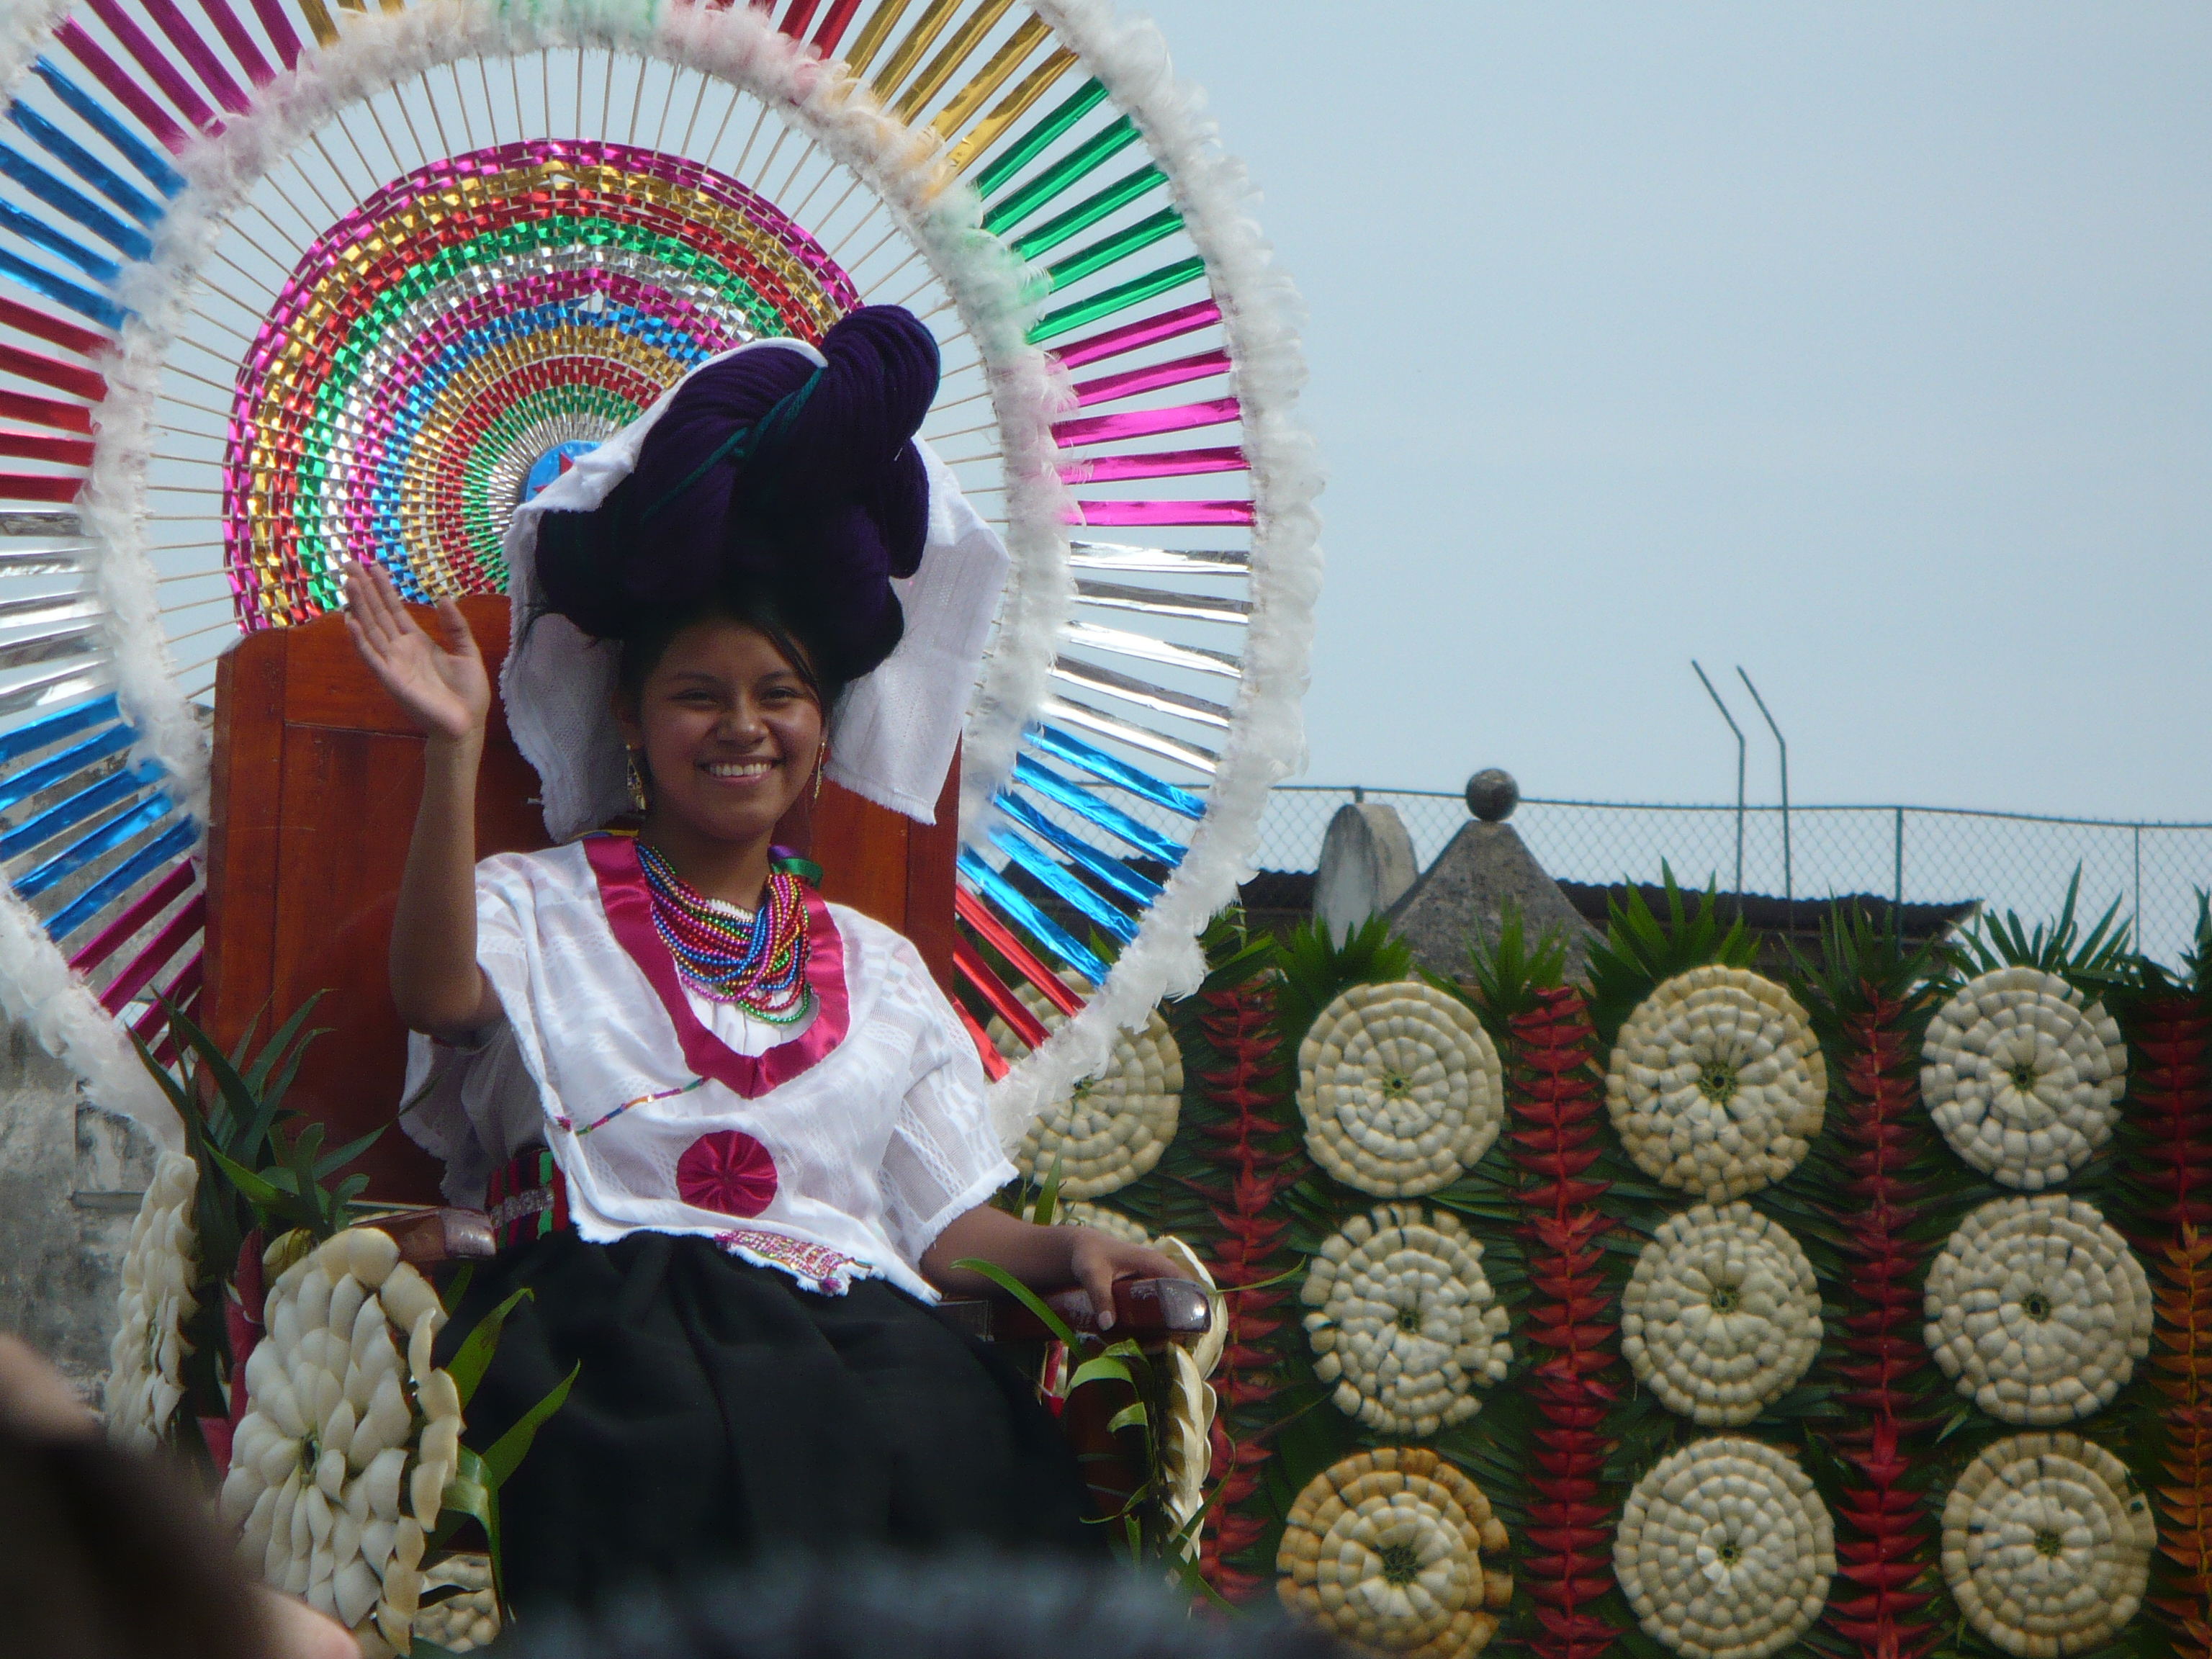 The queen of the feria waves to the crowd in Cuetzalan.